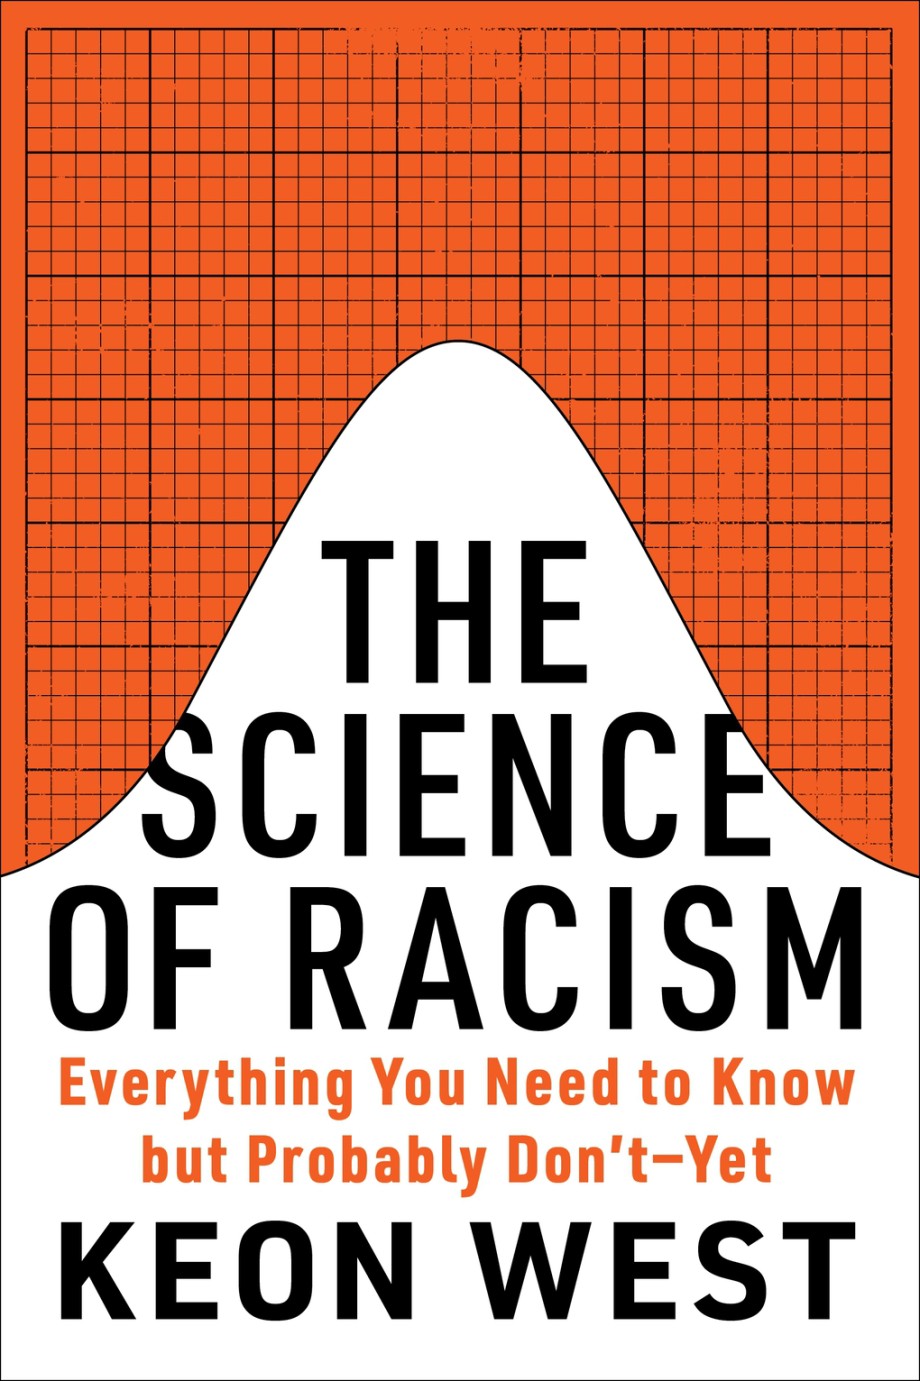 Science of Racism Everything You Need to Know but Probably Don’t—Yet